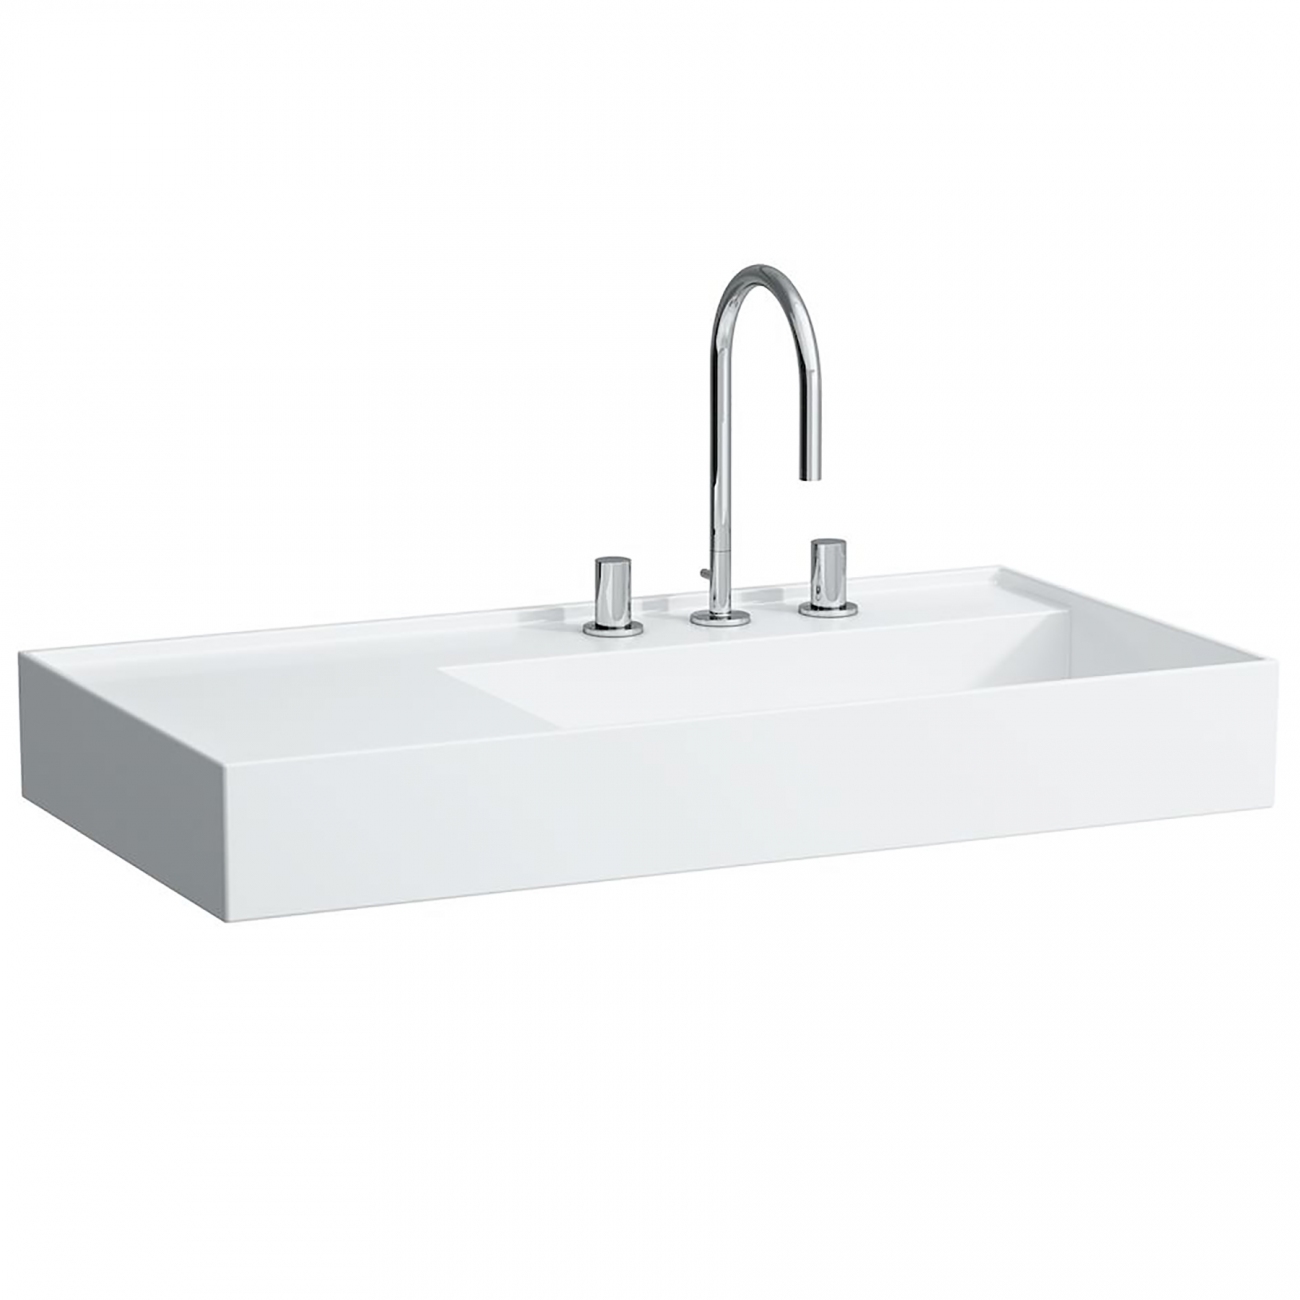 KARTELL BY LAUFEN WALL HUNG BASIN